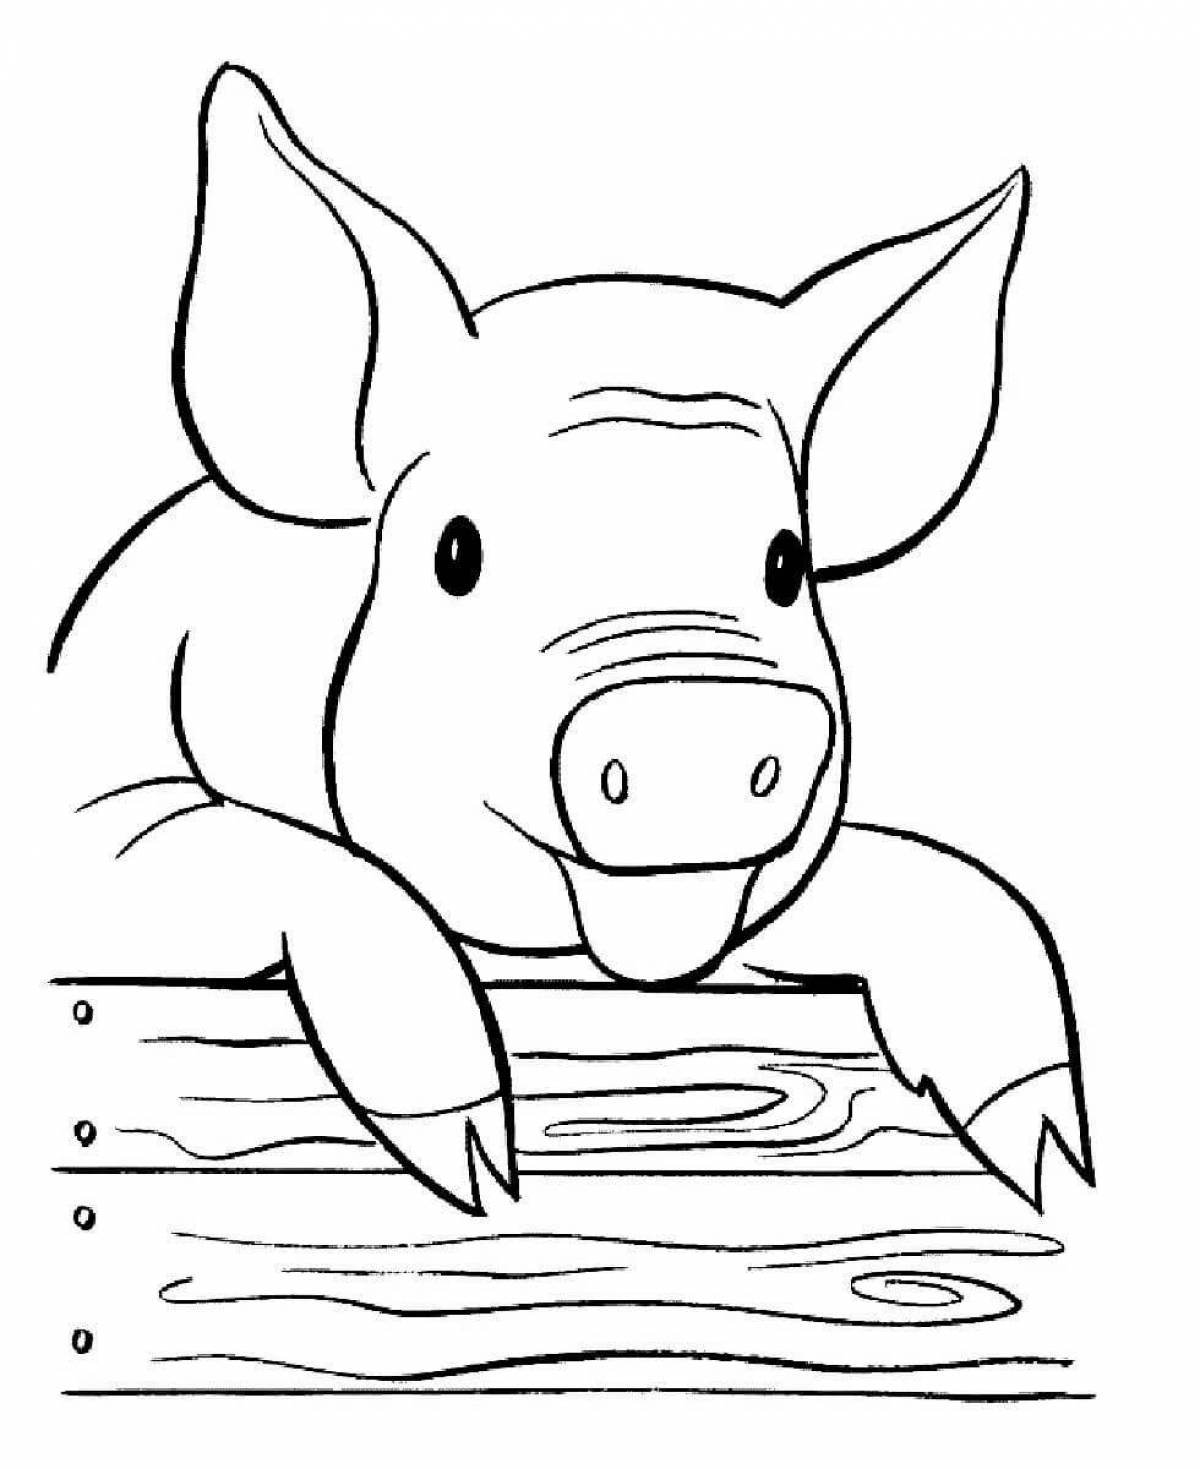 A fun pig coloring book for kids